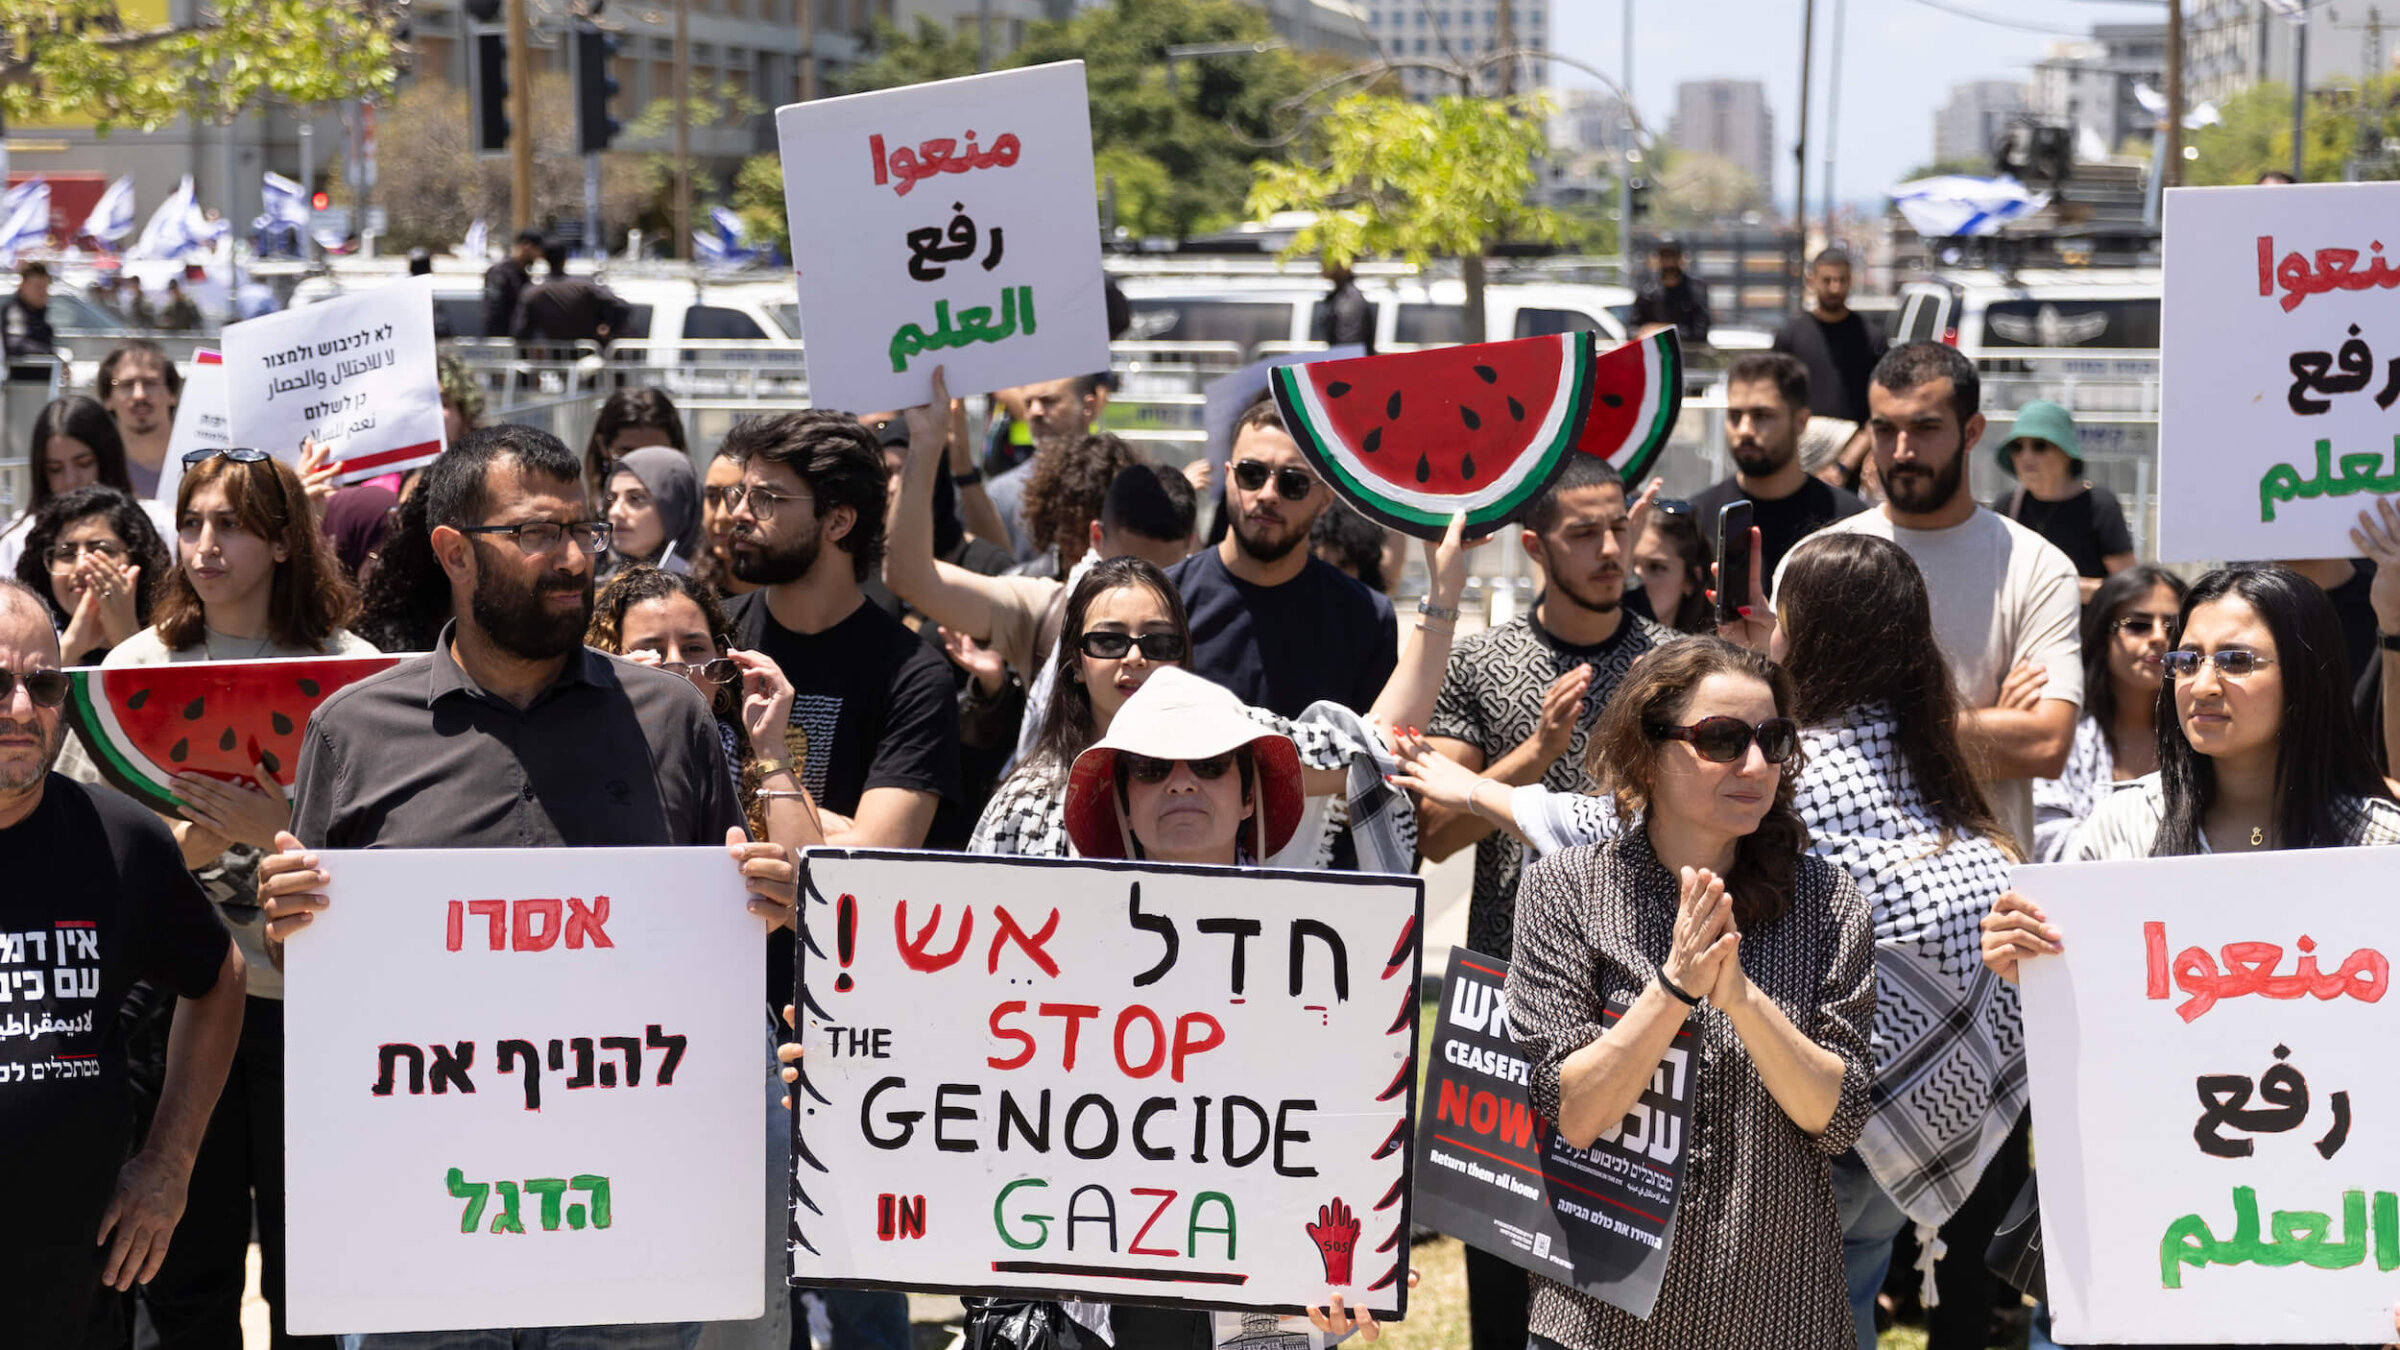 Pro-Palestinian activists hold signs during a rally to mark Nakba Day at Tel Aviv University on May 15.